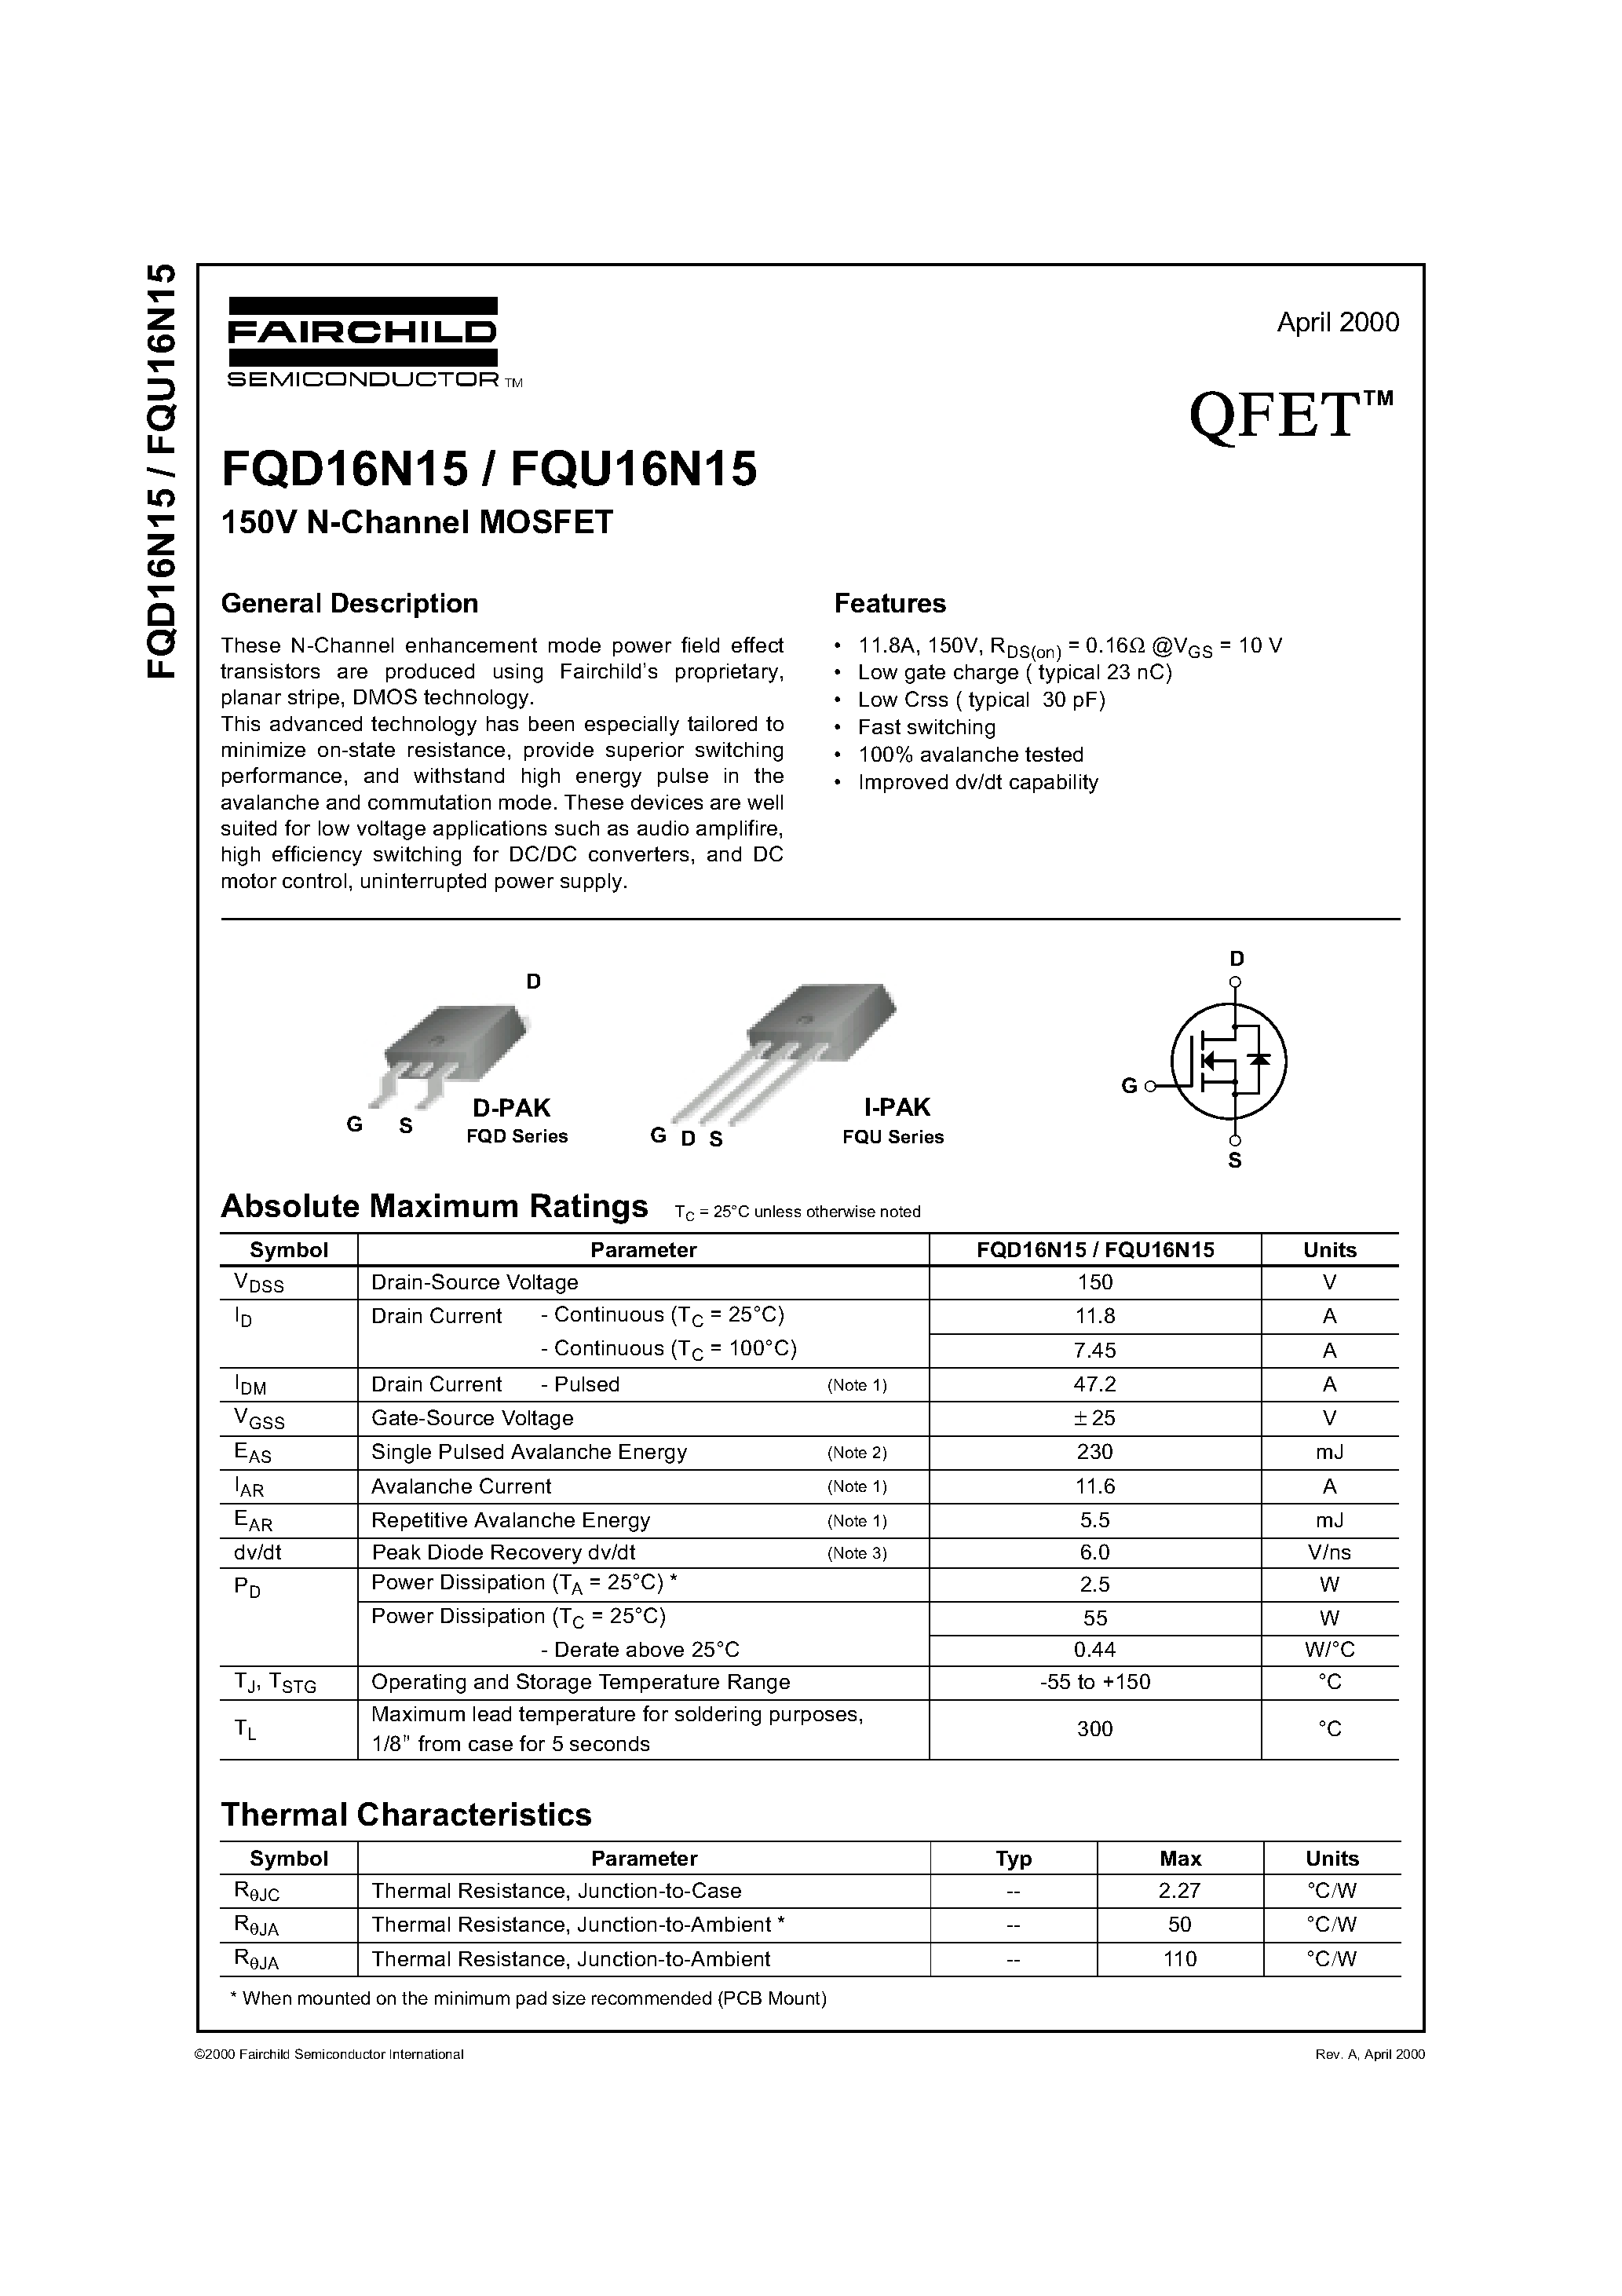 Datasheet FQD16N15 - 150V N-Channel MOSFET page 1